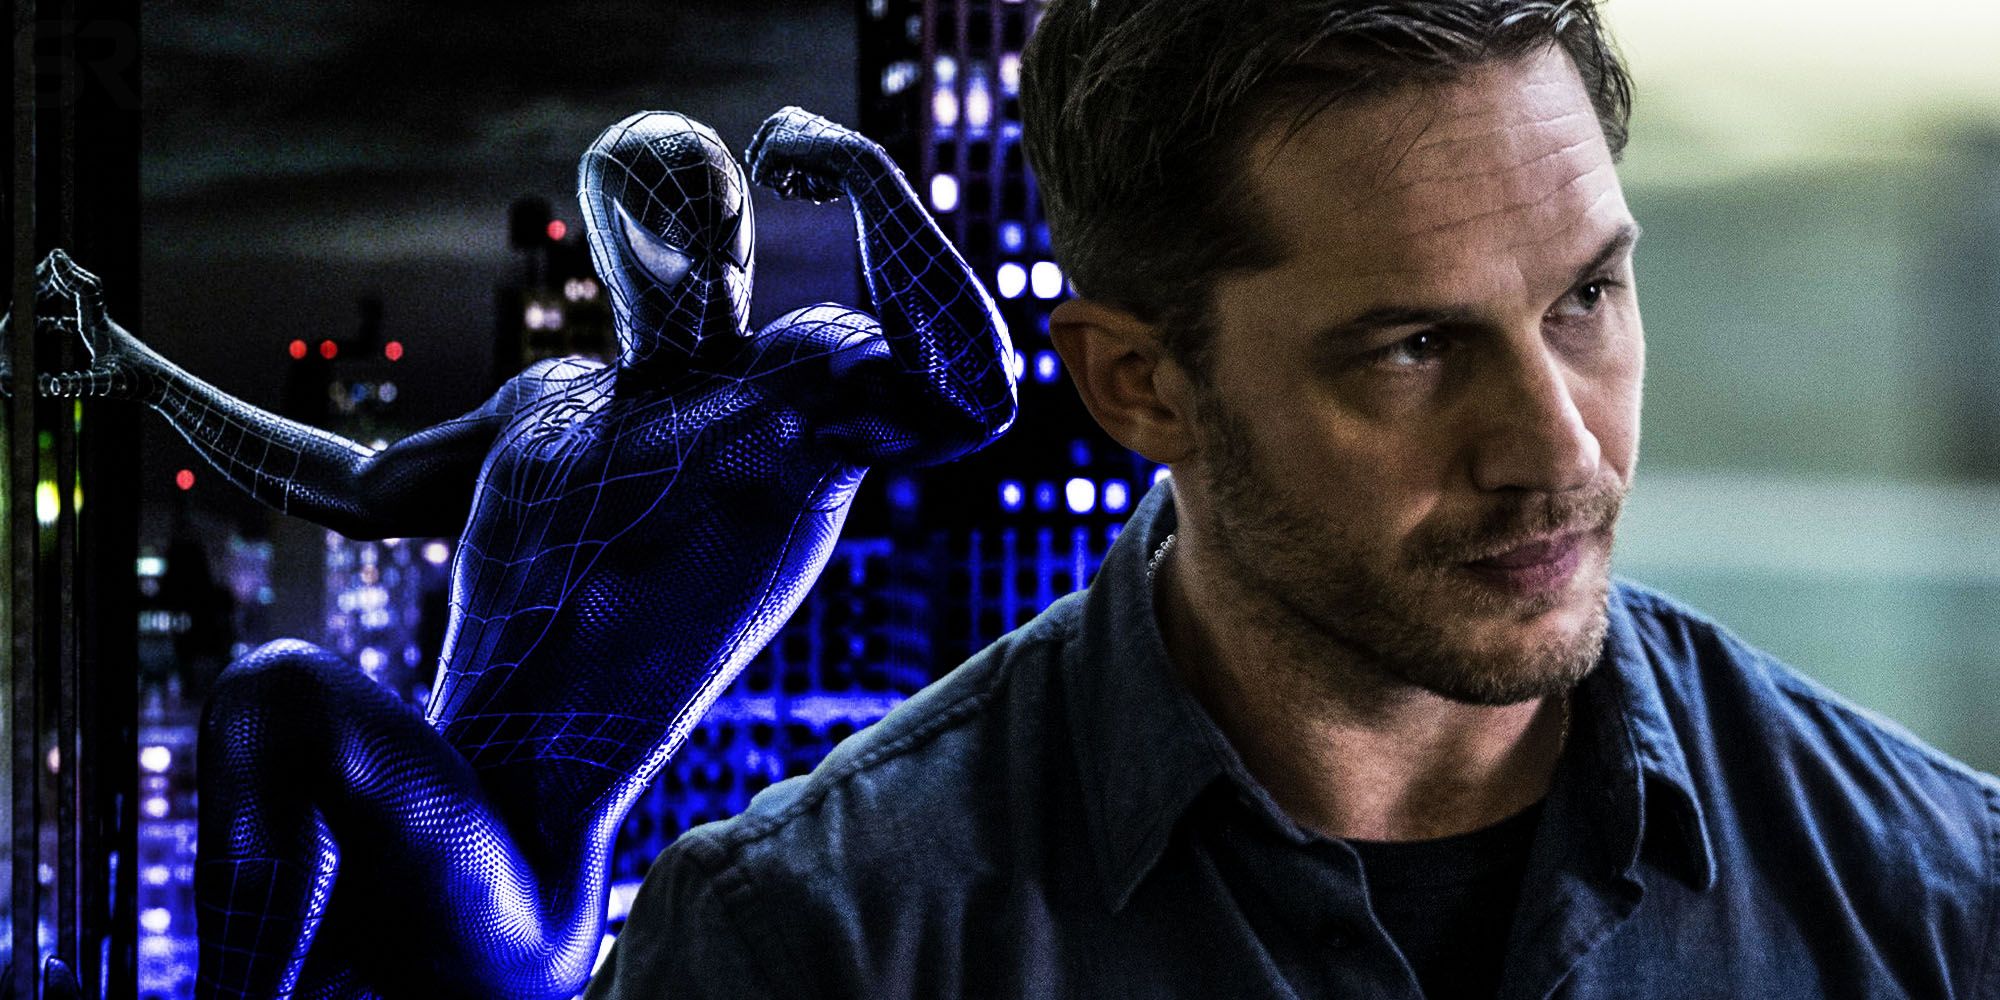 Superimposed image of Spider-Man flexing and Eddie Brock in the Spider-Man and Venom movies.